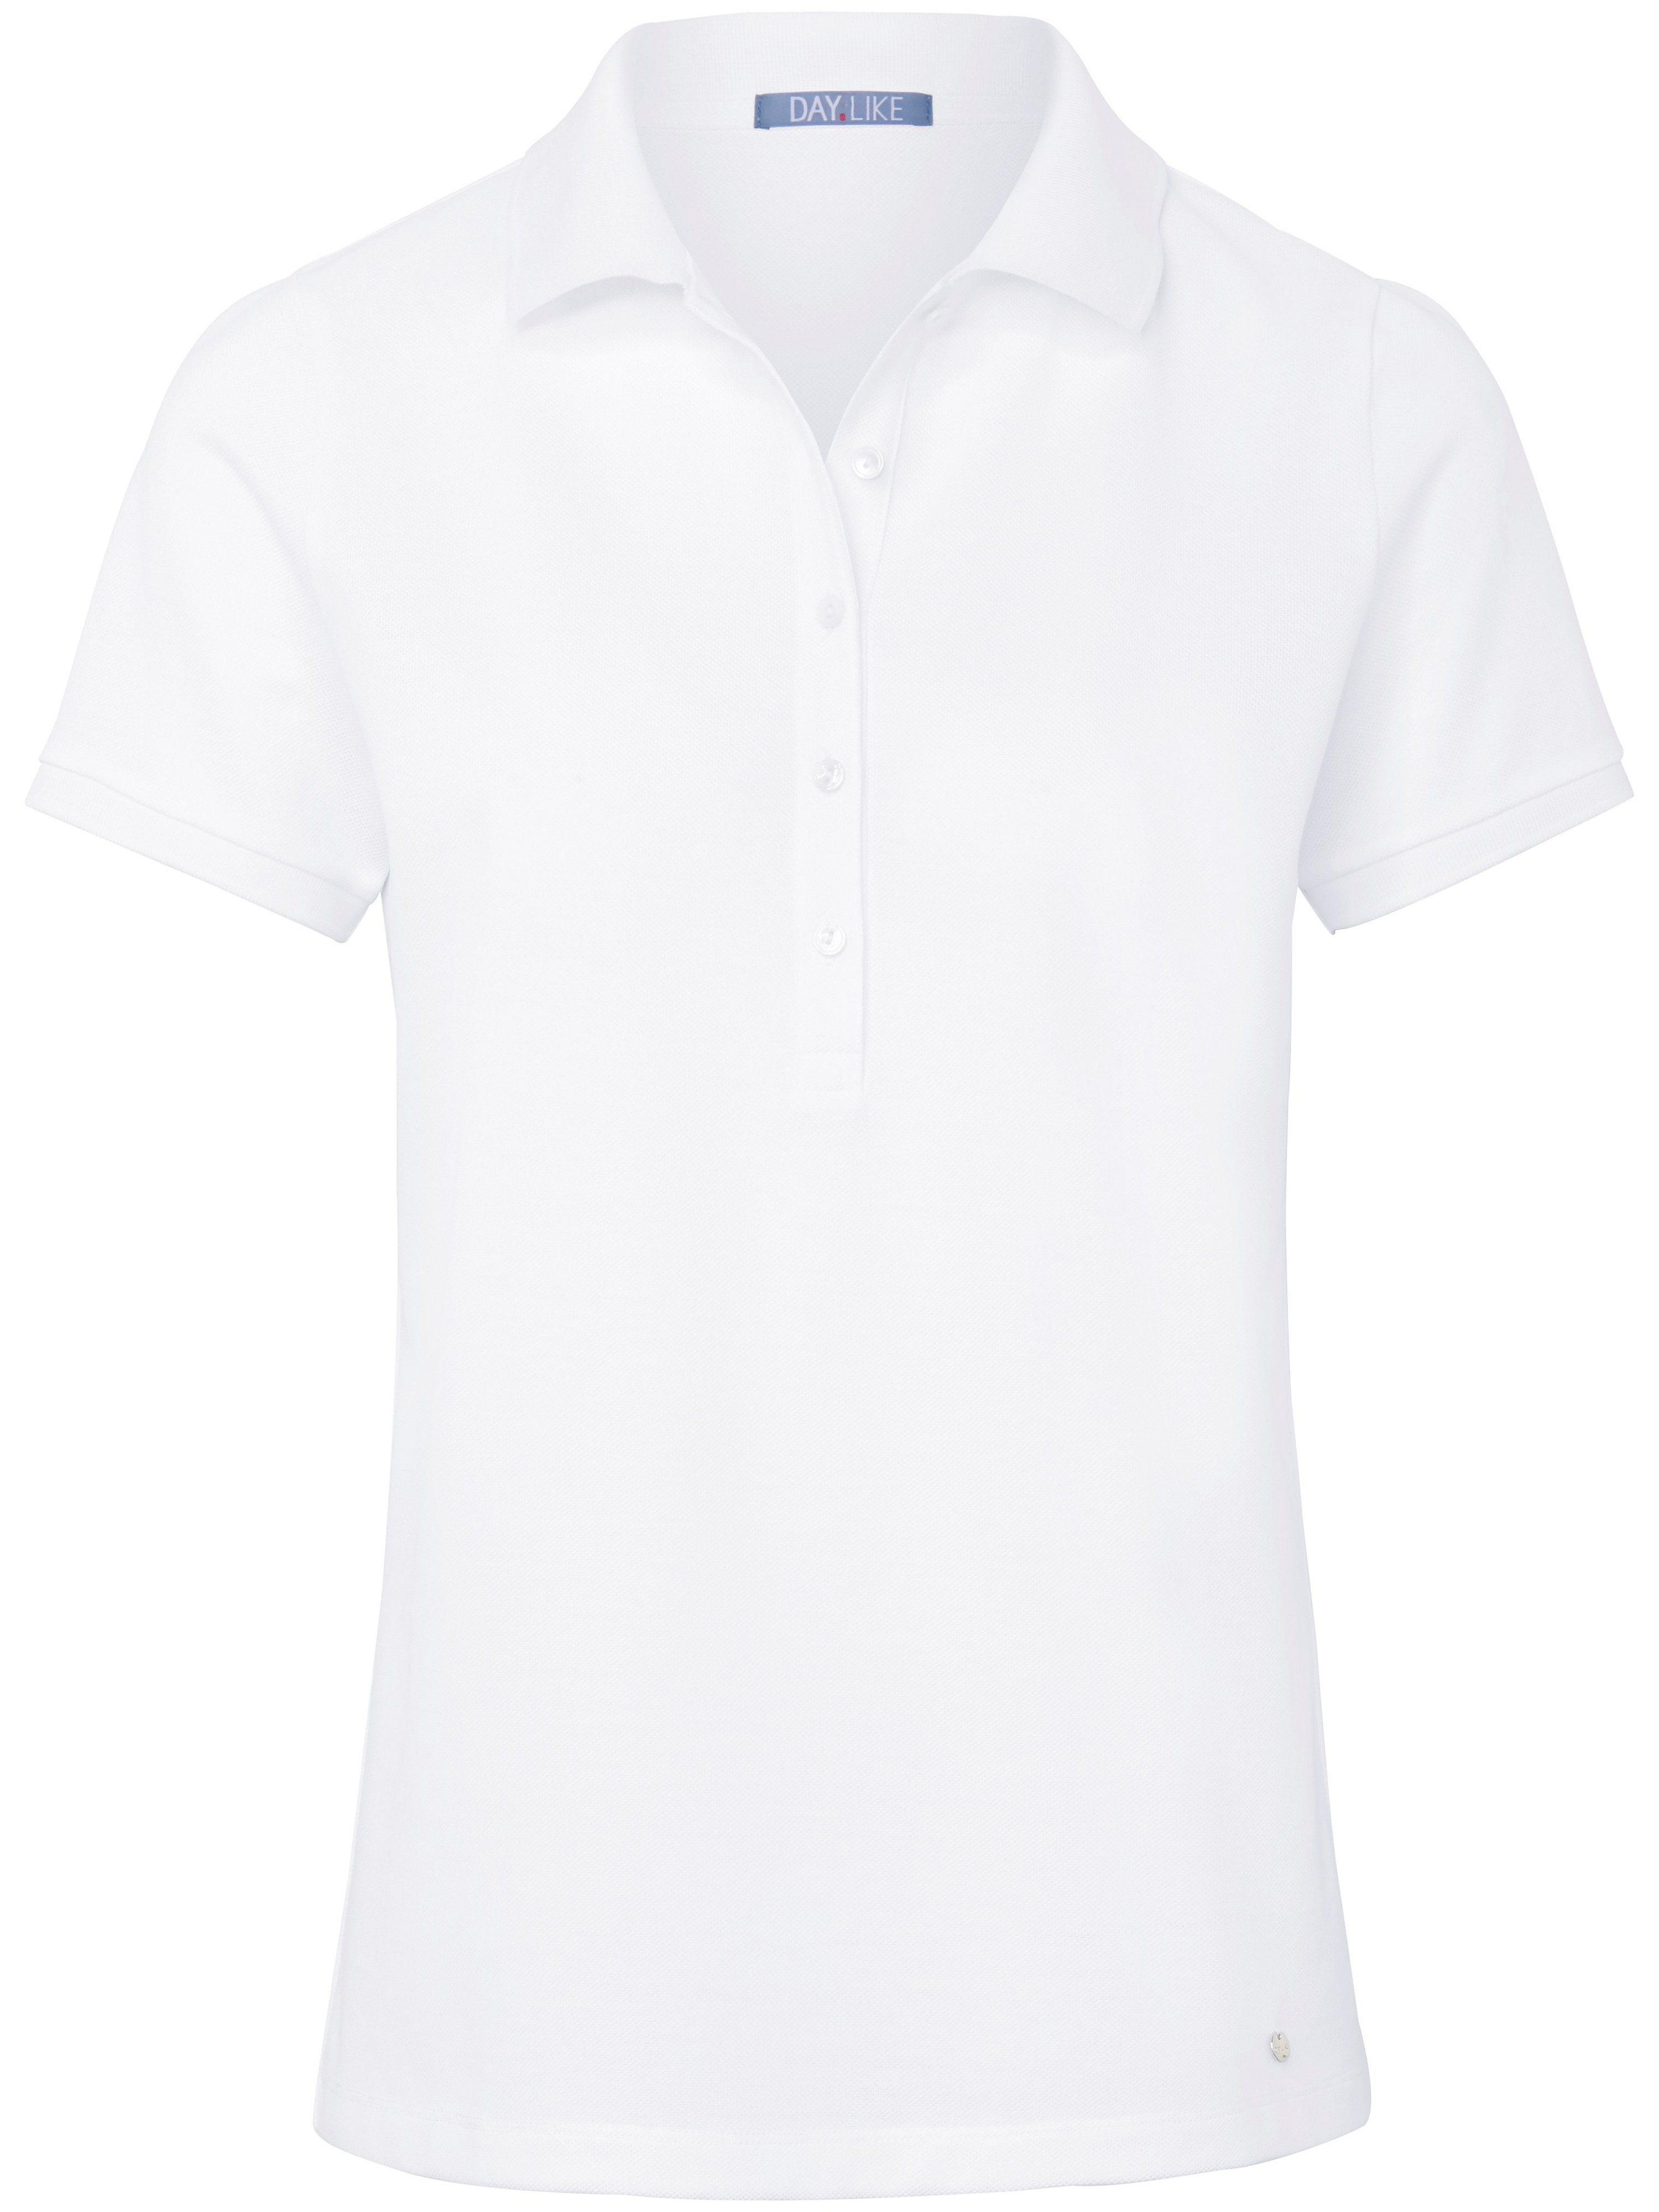 Le polo 100% coton manches courtes  DAY.LIKE blanc taille 50